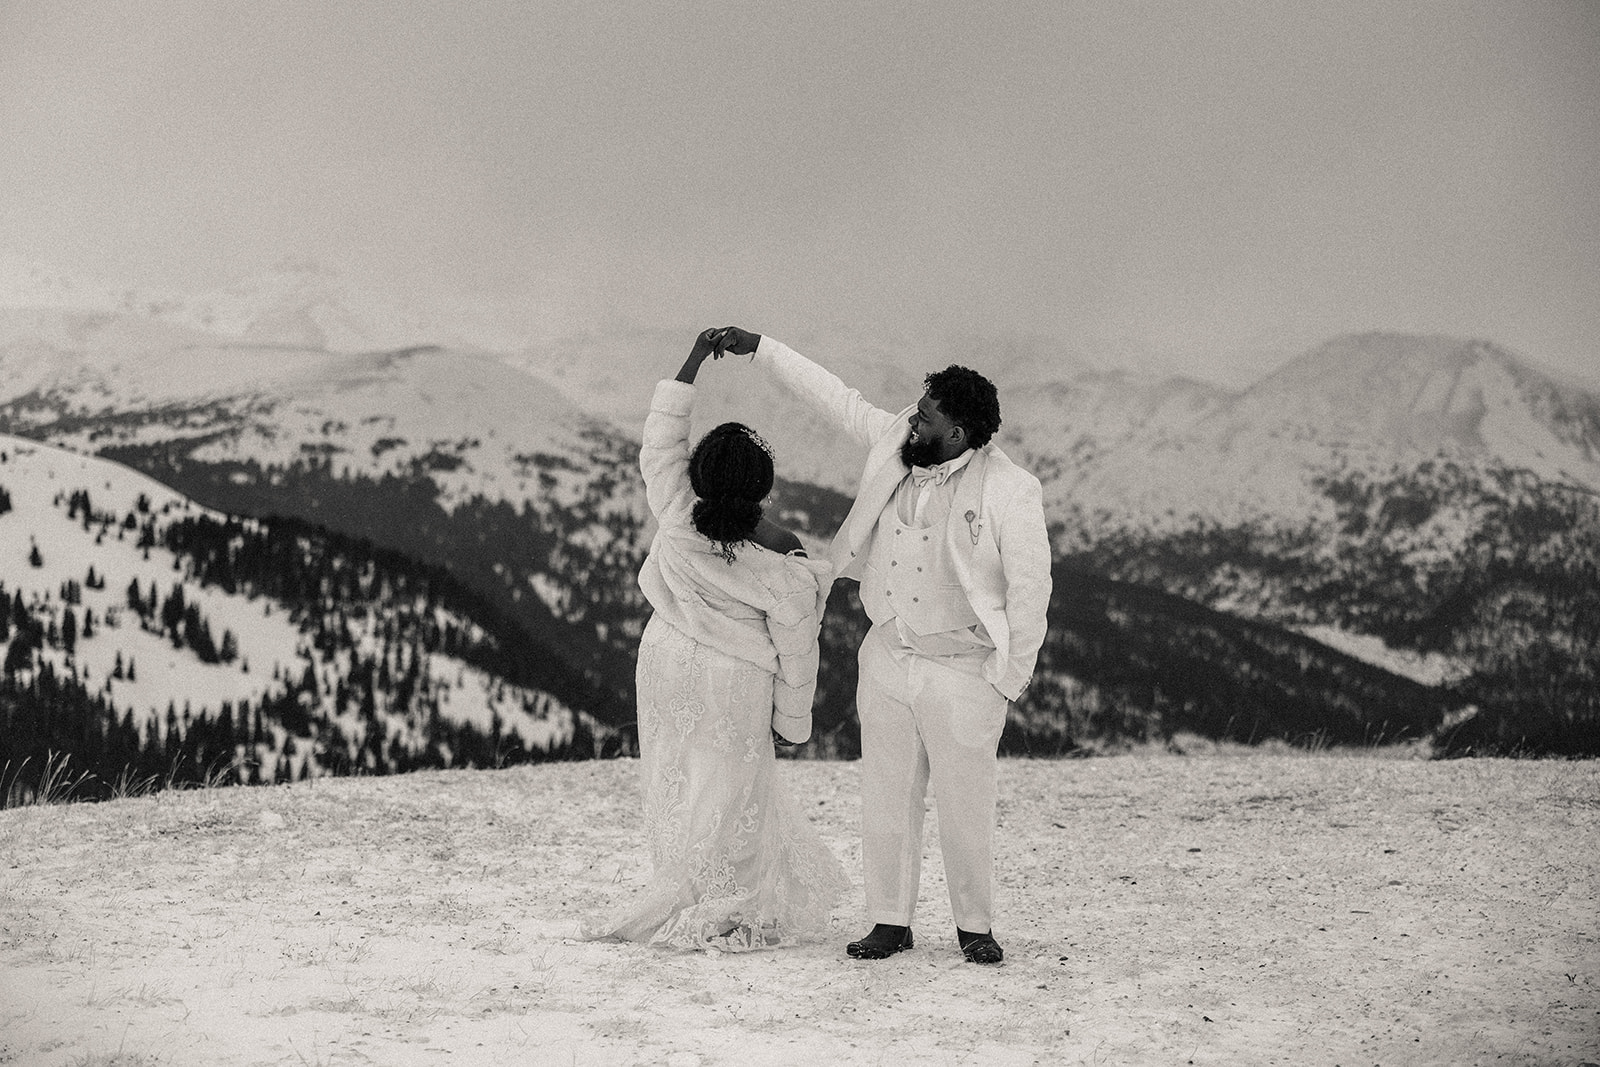 Man dancing with woman playfully during their snowy anniversary session 